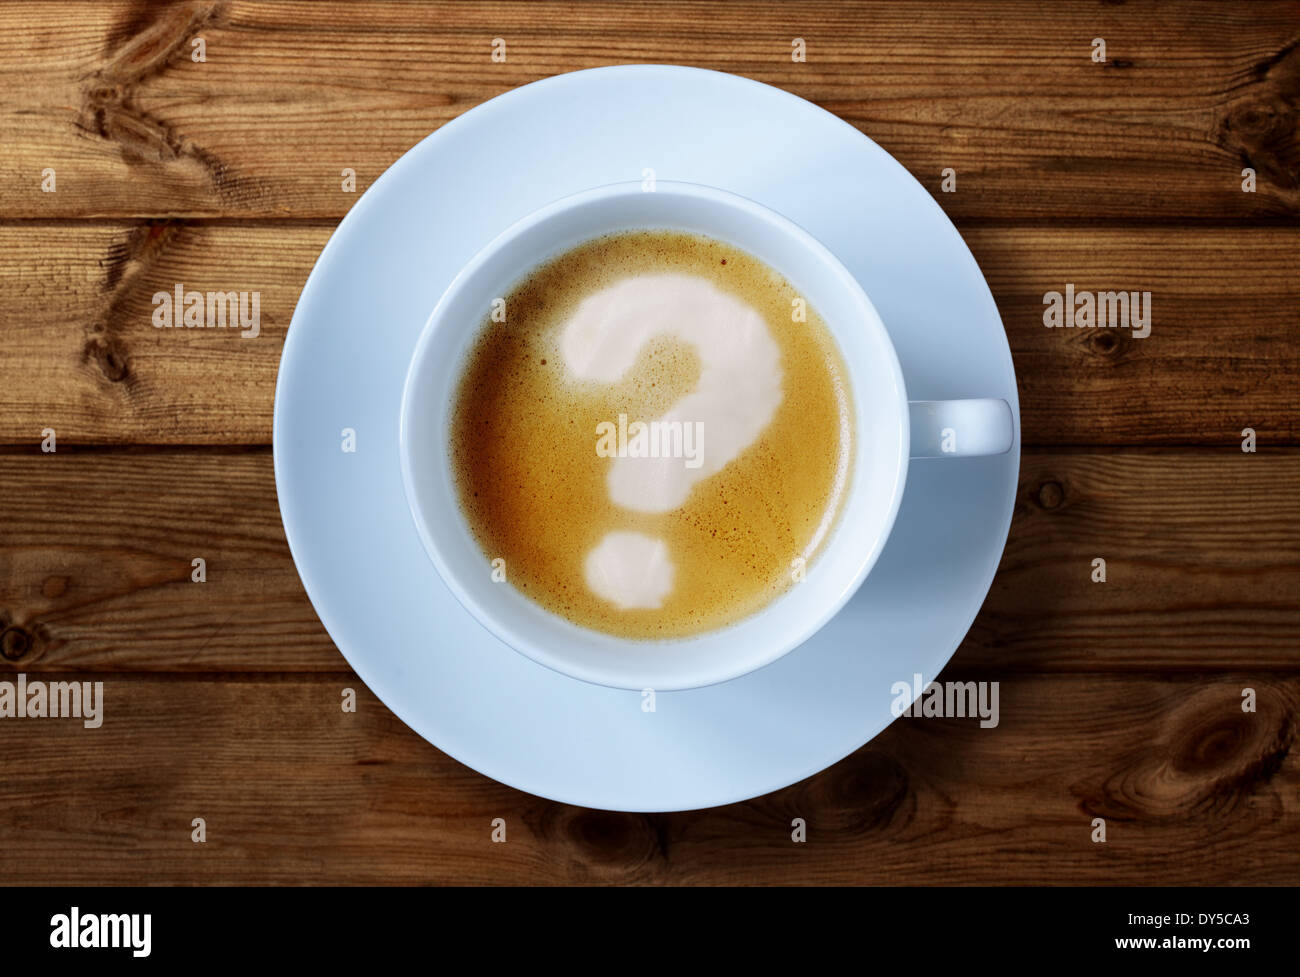 Coffee cup questions Stock Photo